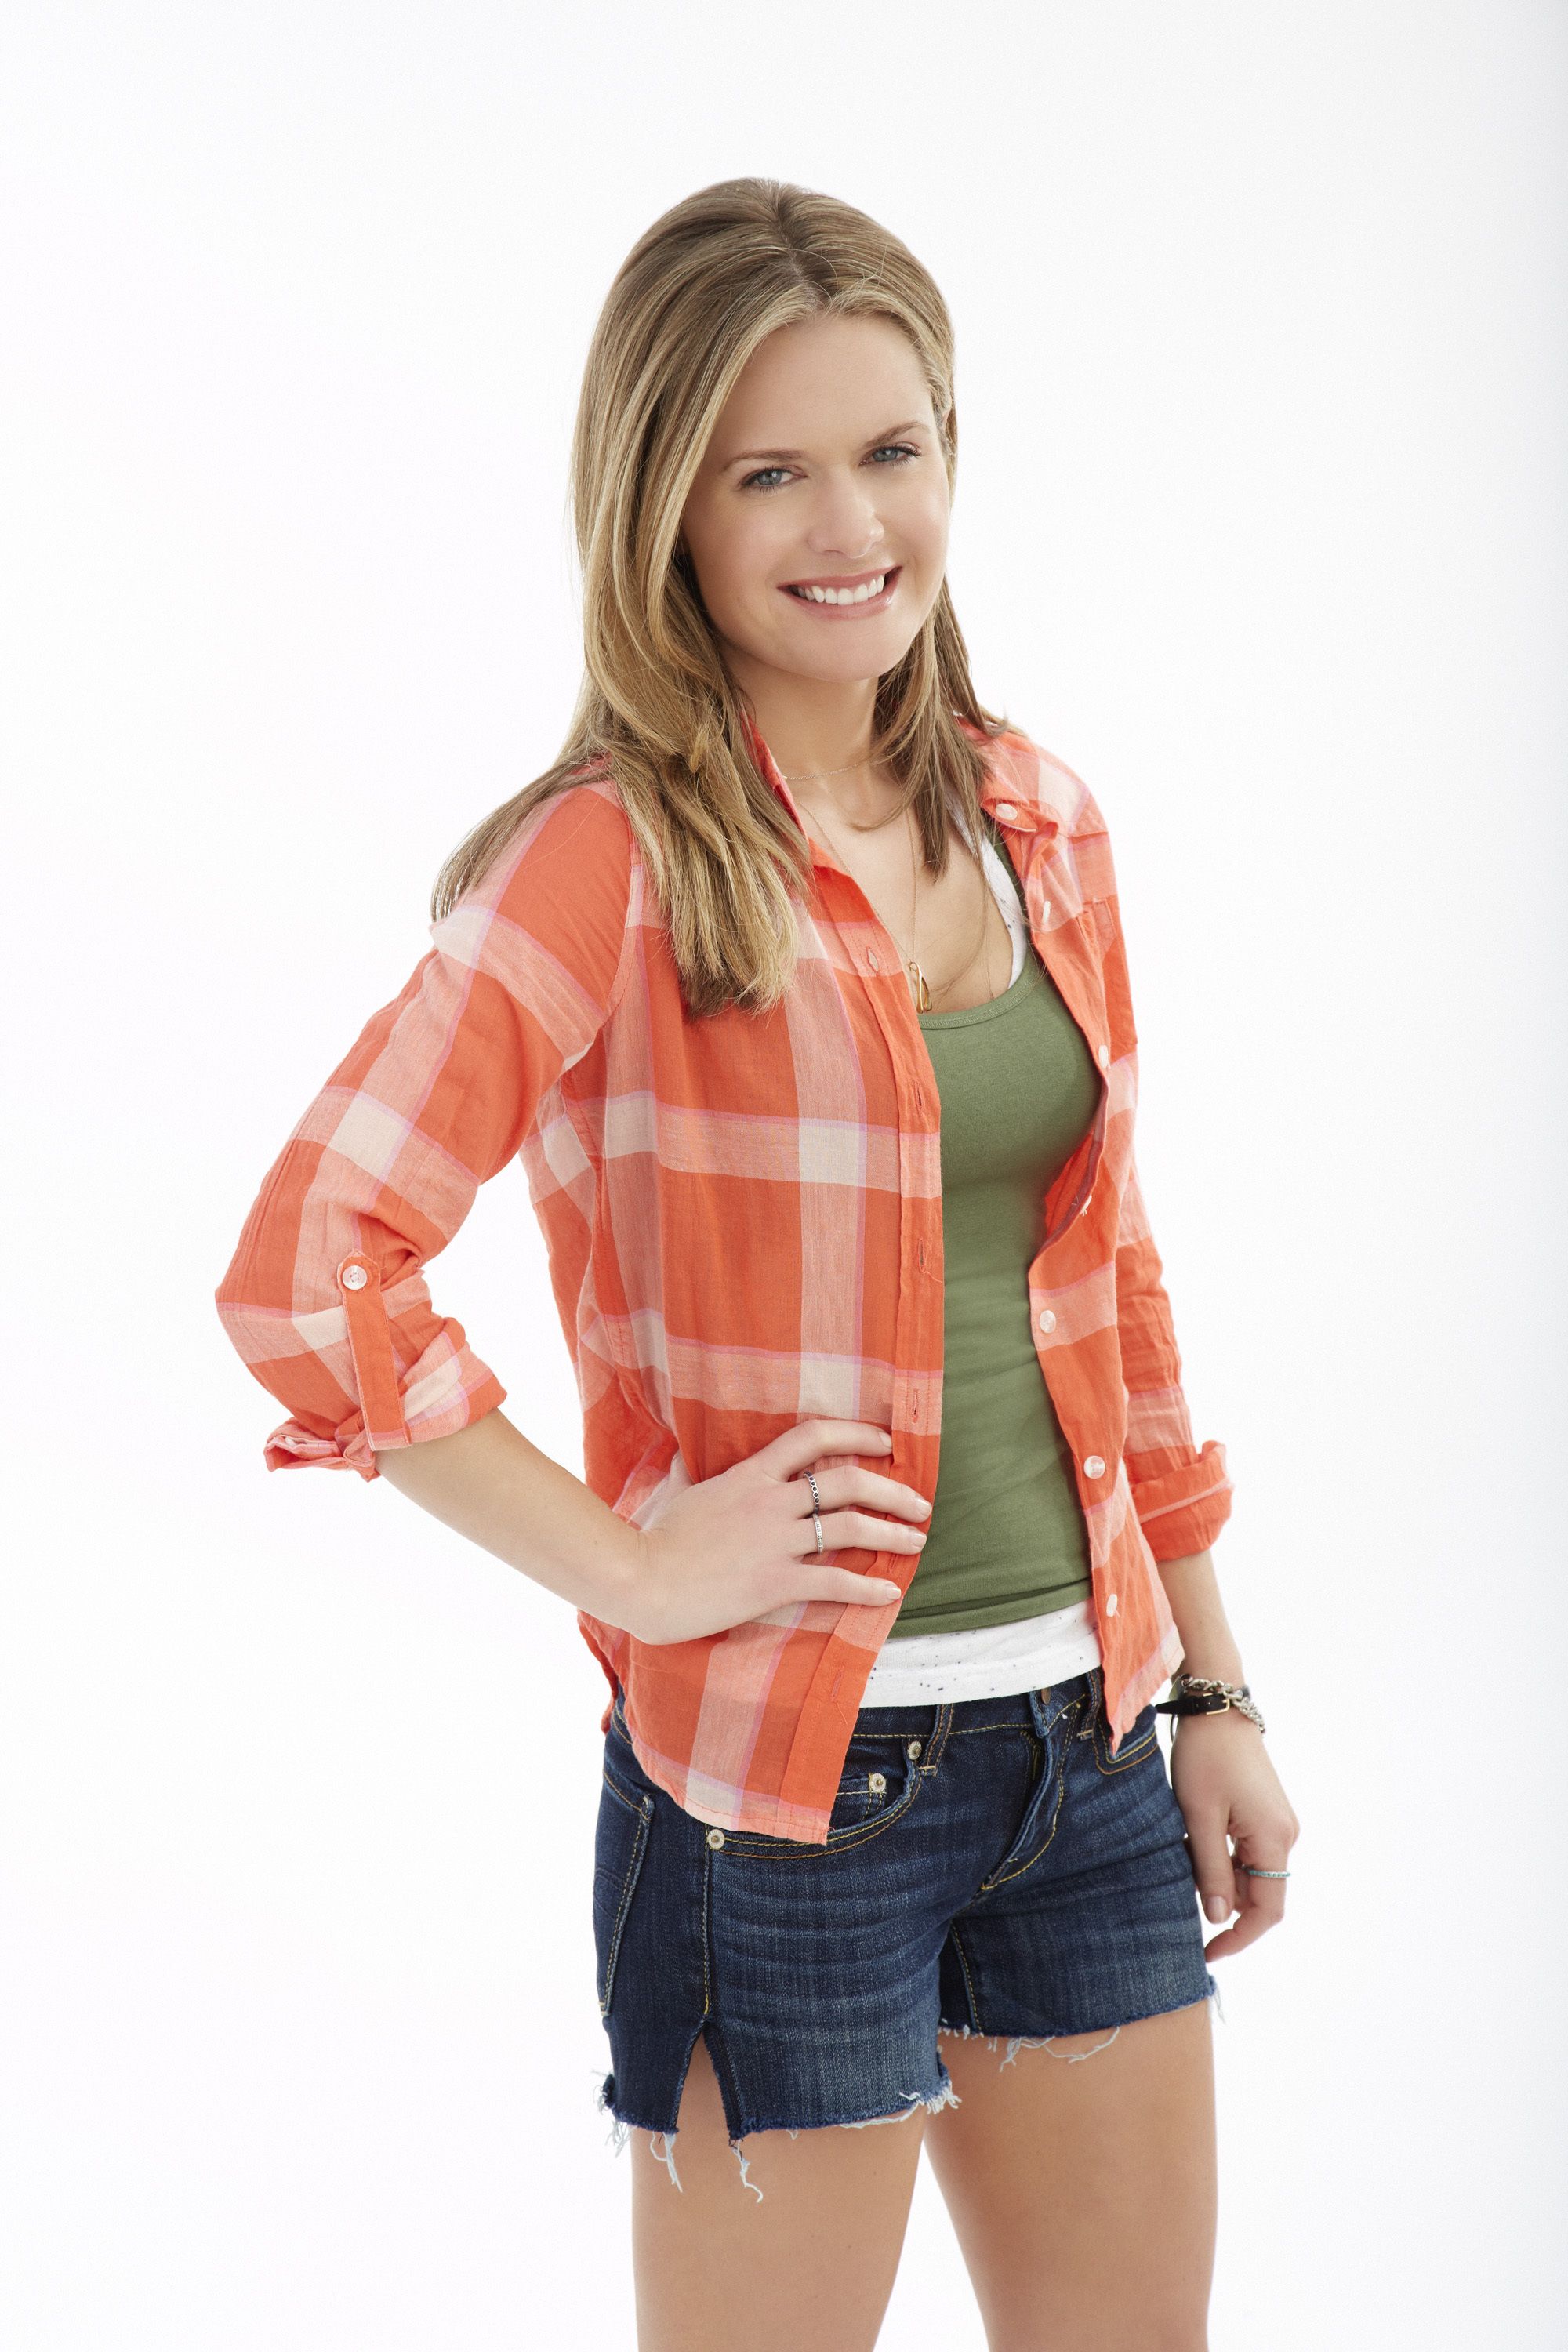 65+ Hot Pictures Of Maggie Lawson Will Melt You With Her Hotness Like A Marshmellow | Best Of Comic Books